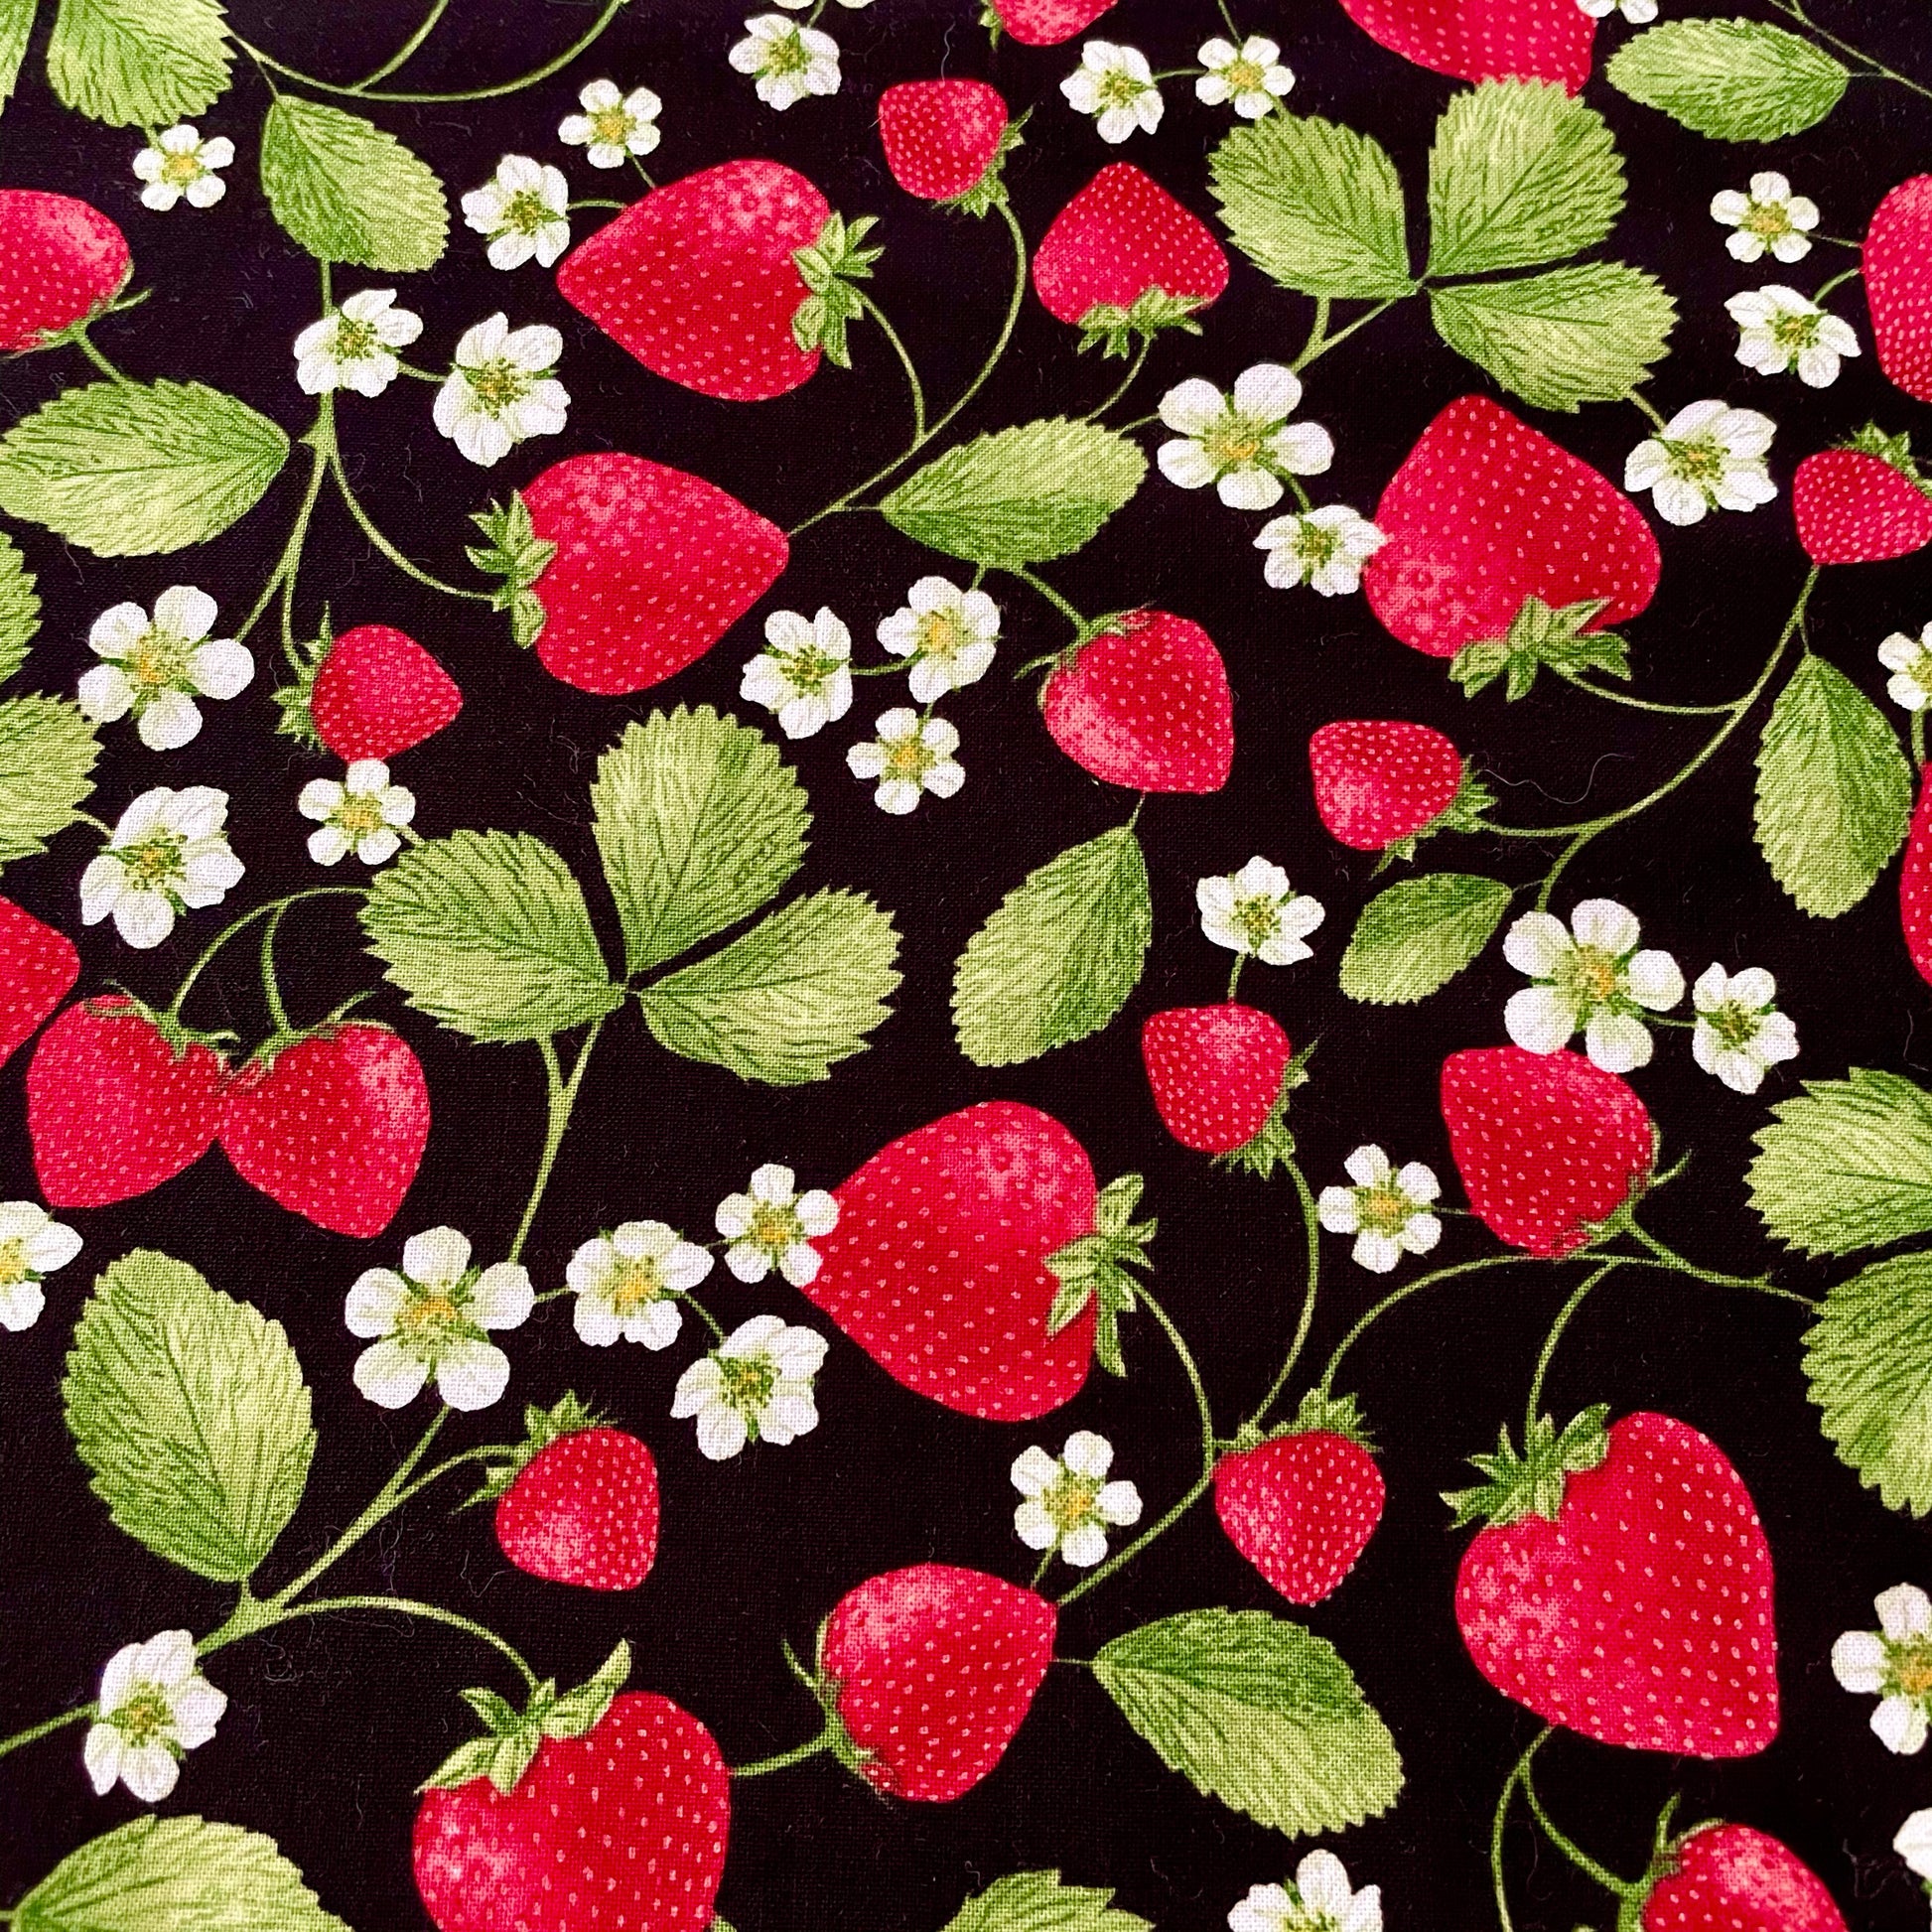 Strawberries and Vines Fabric by Timeless Treasures.